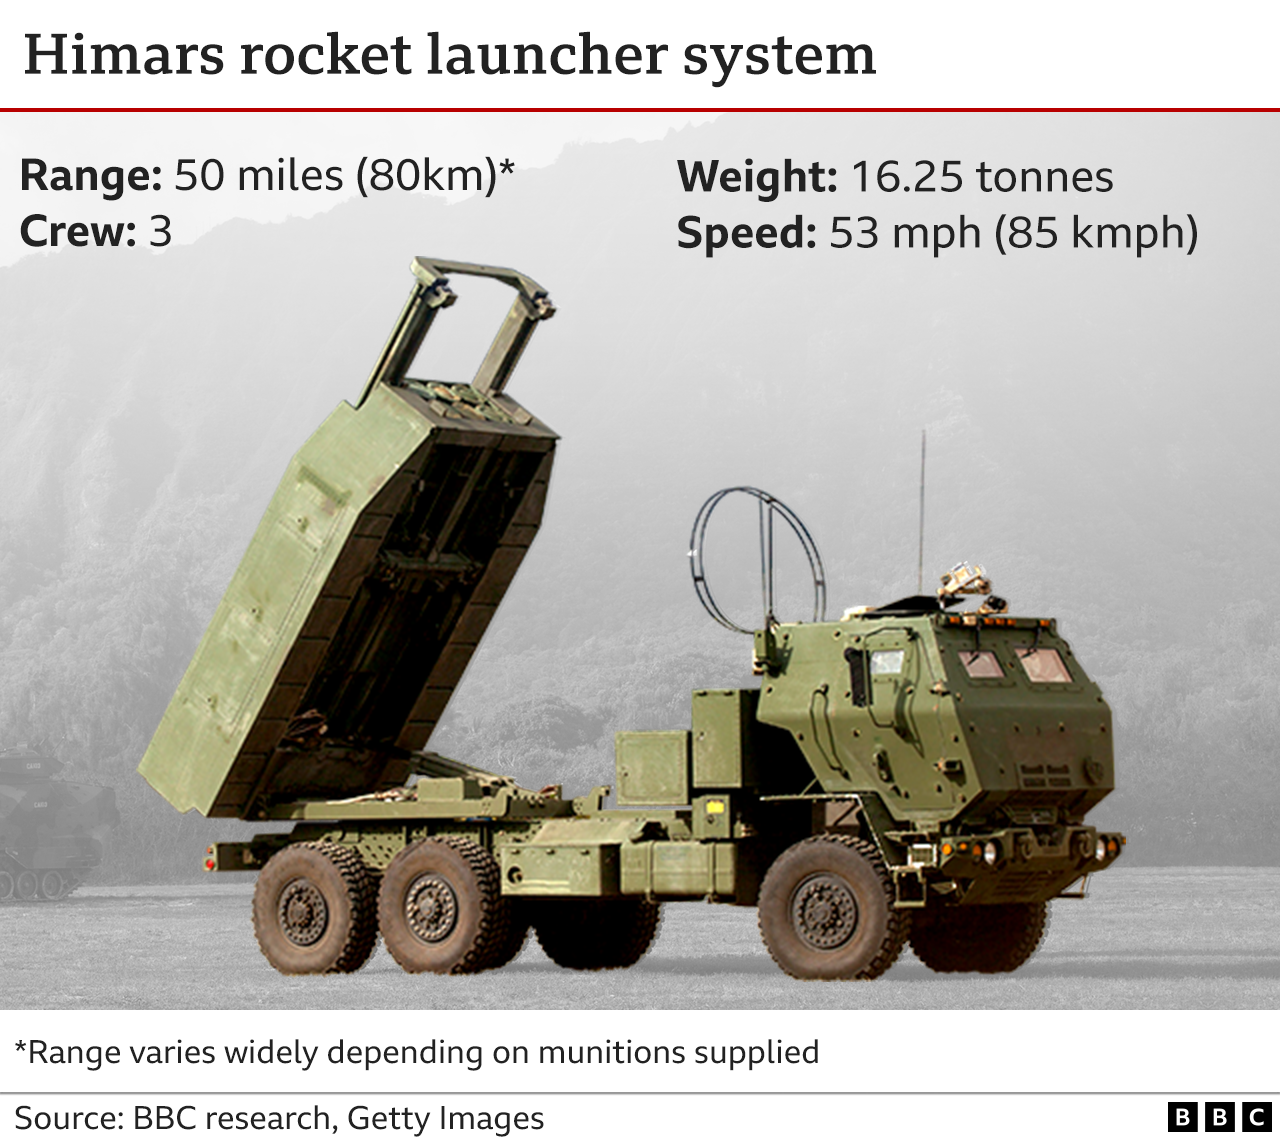 Graphic showing details of the Himars multiple rocket launcher.